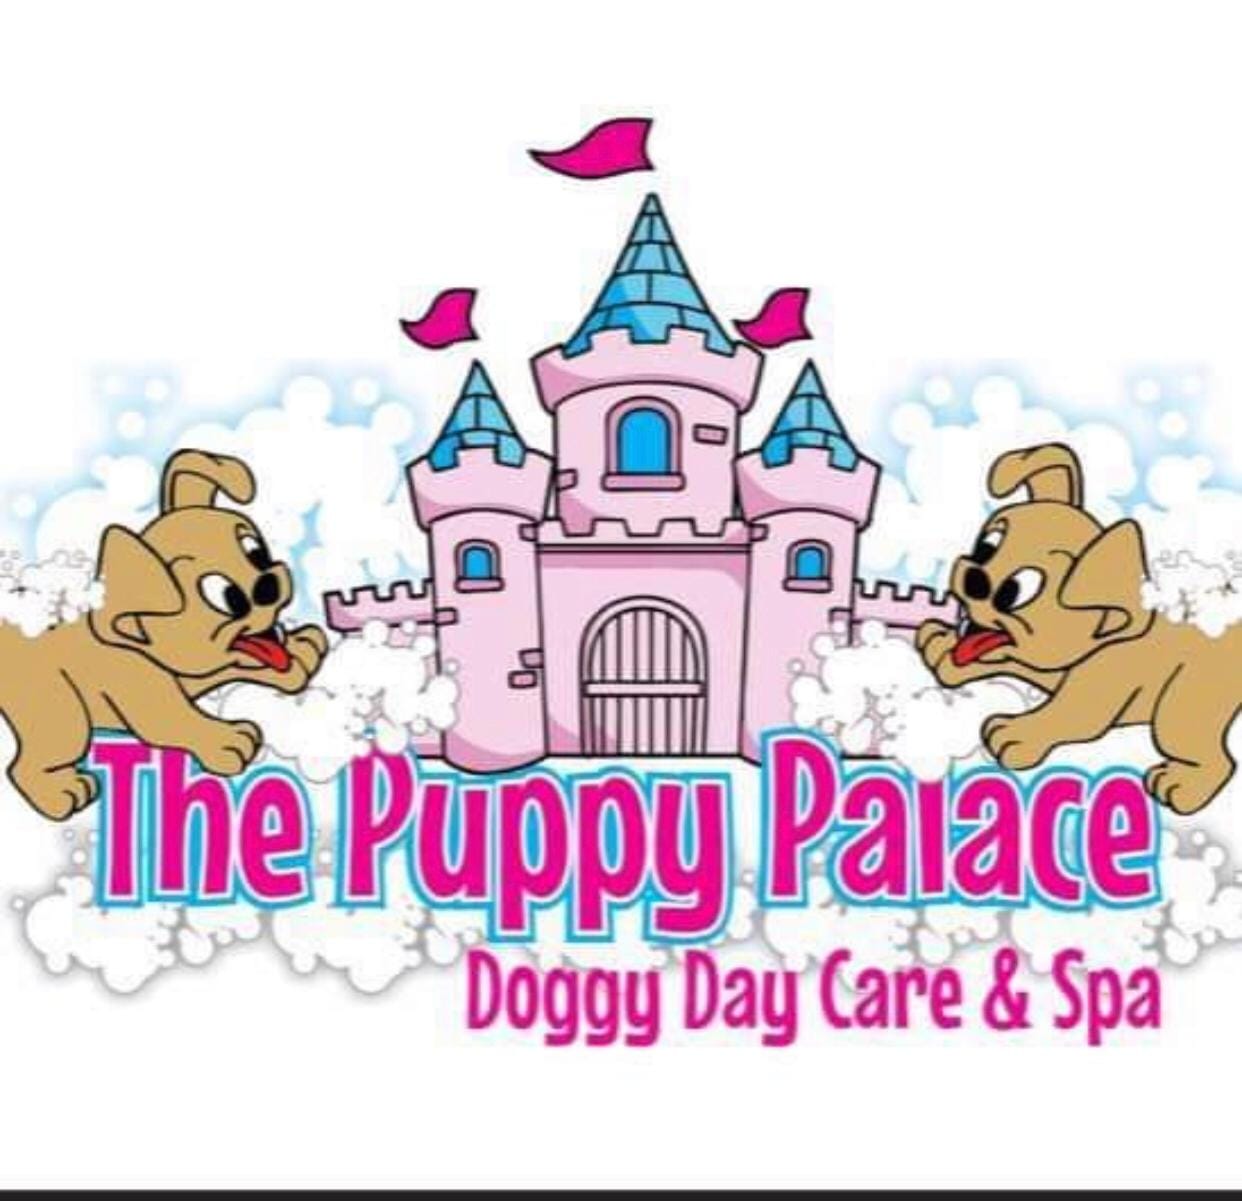 The Puppy Palace Doggy Daycare and Spa